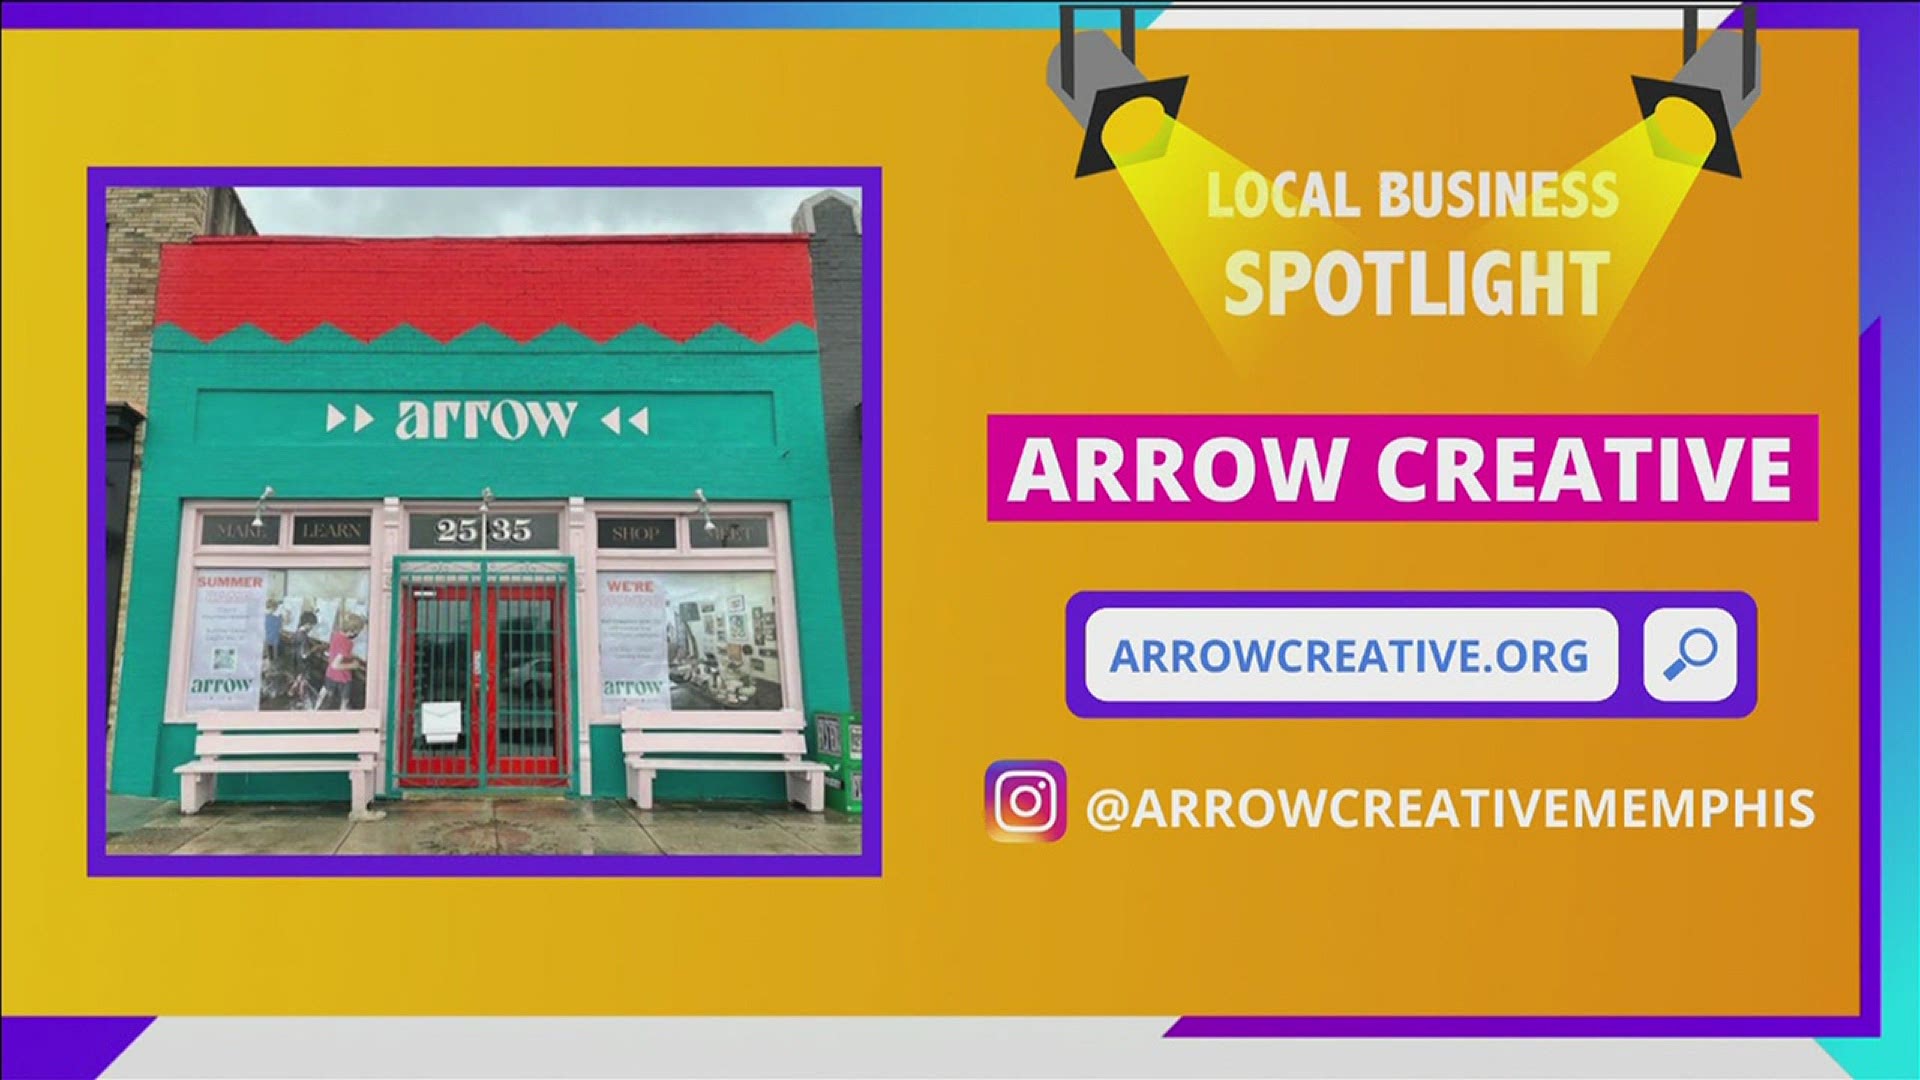 Attention all creatives! If you're looking to become a professional artist and/or create something for fun, check out what Arrow Creative has to offer!